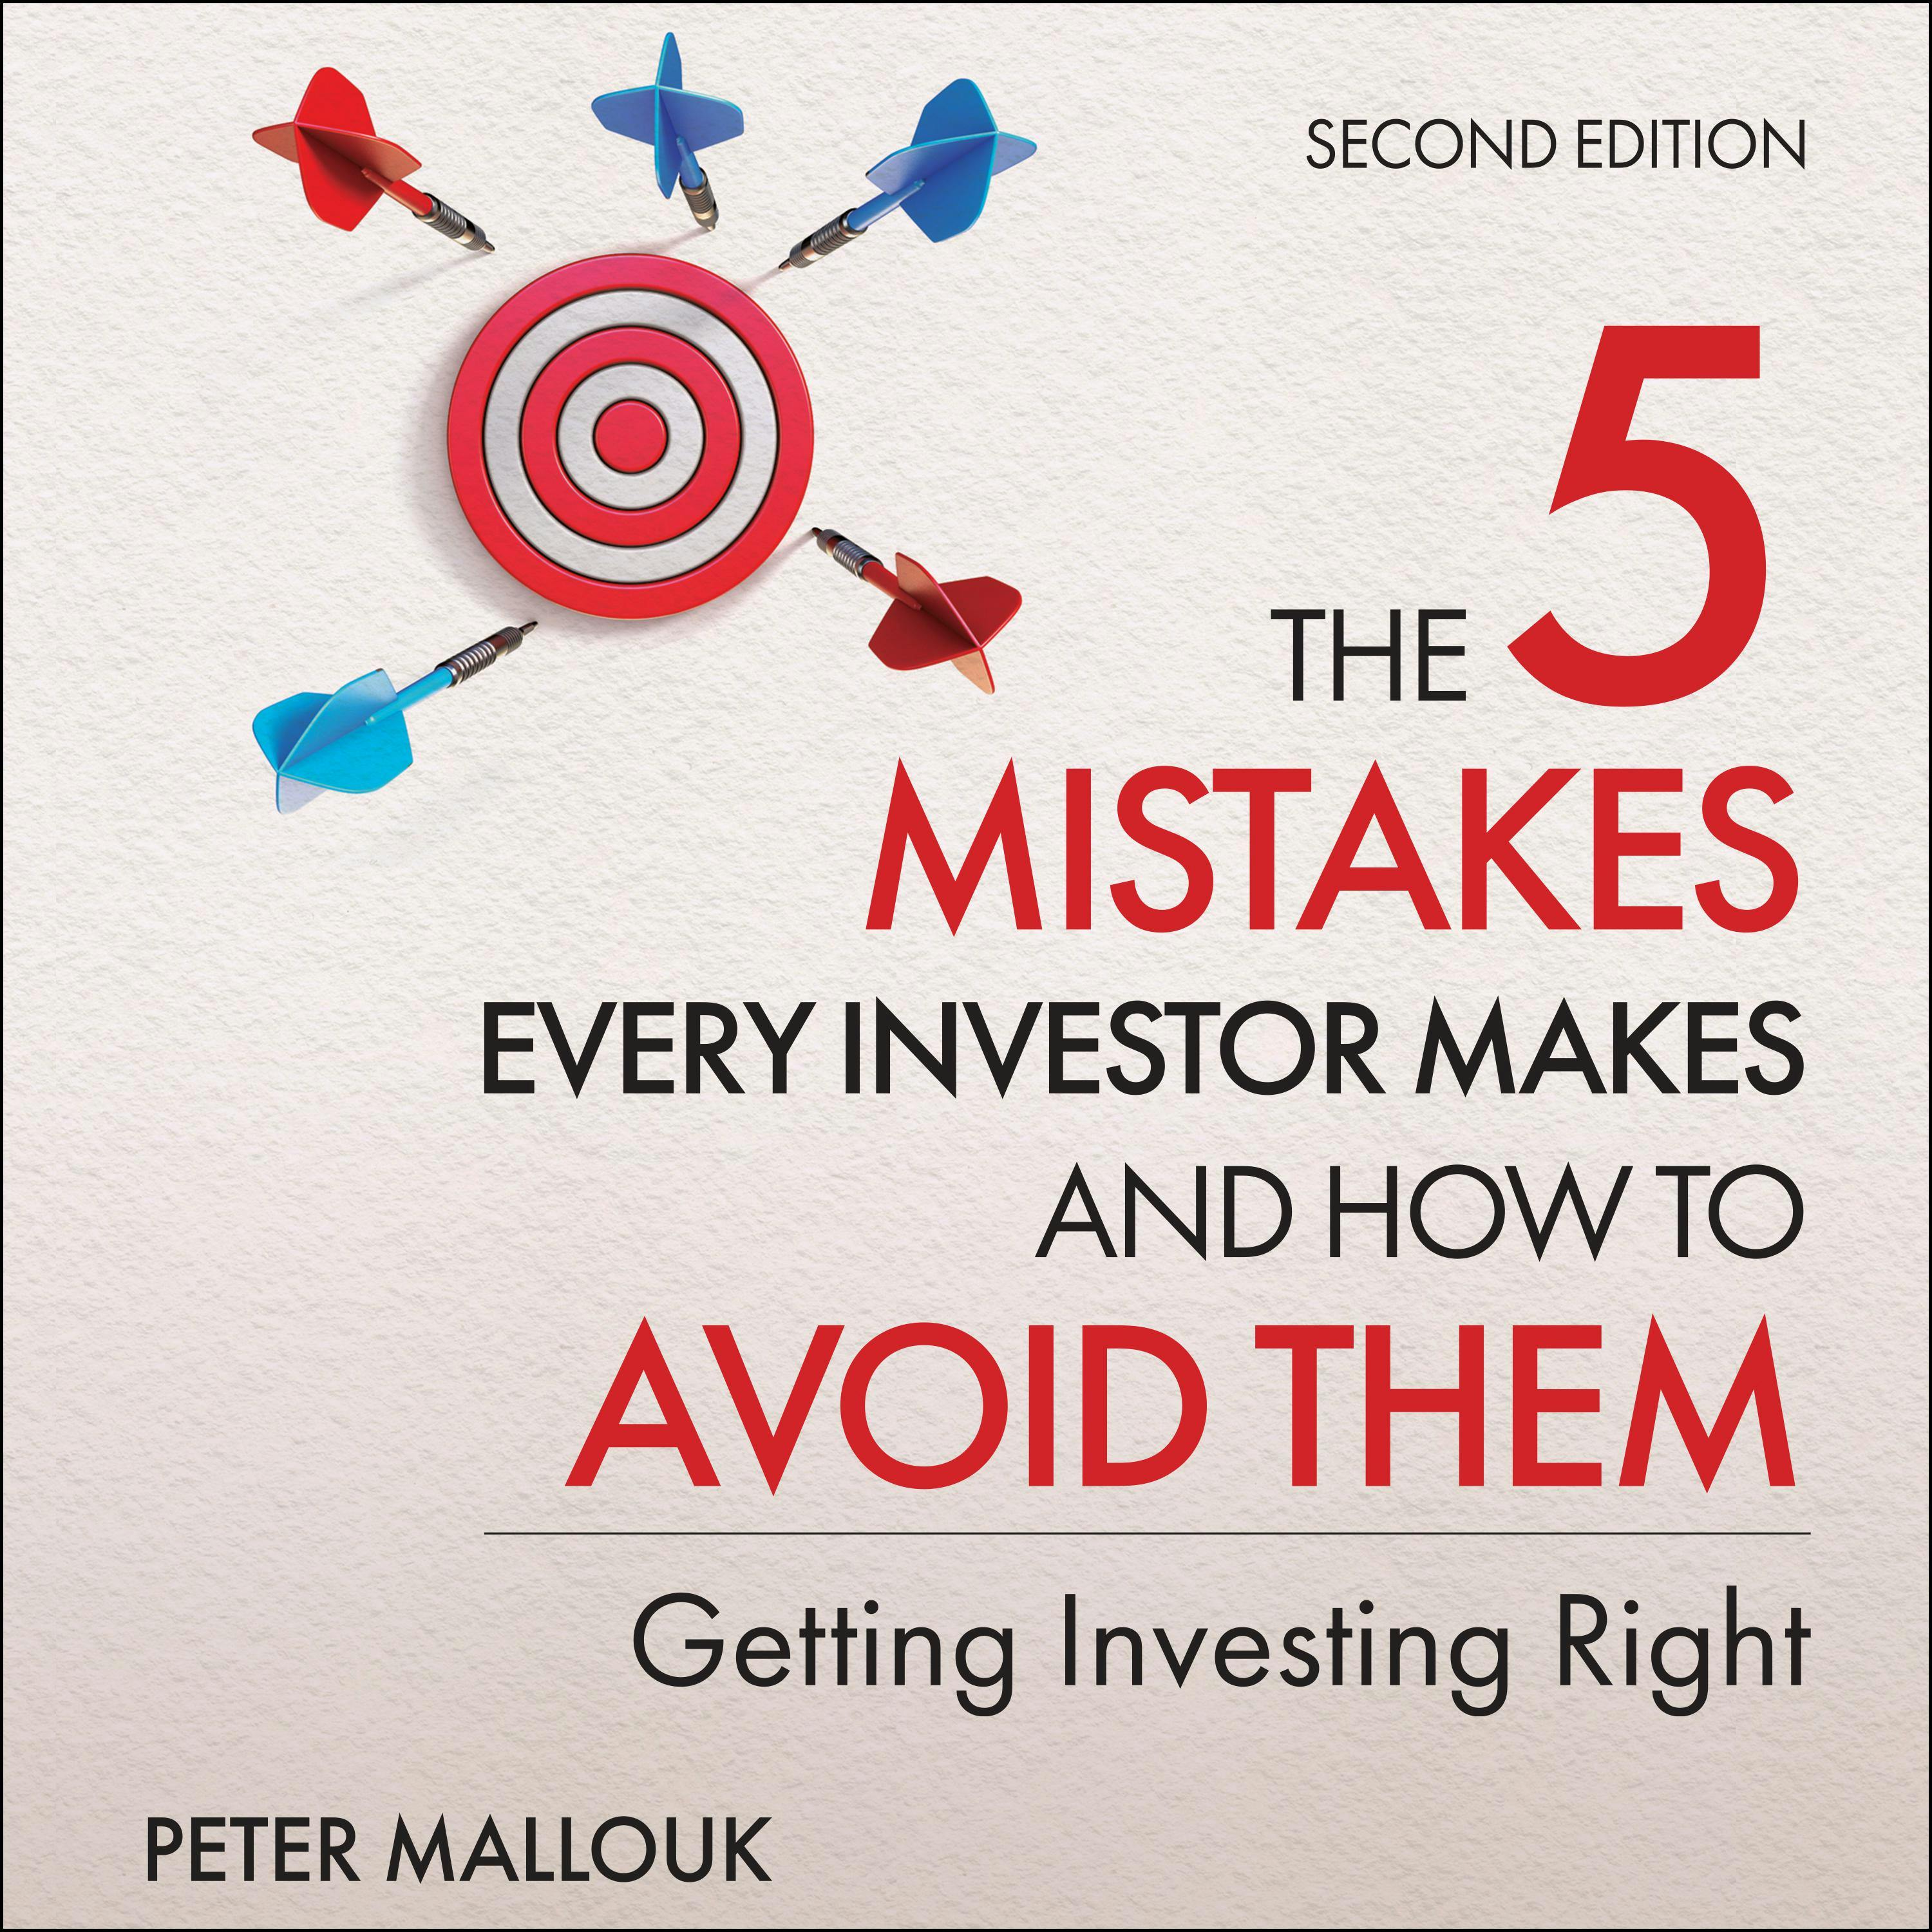 The 5 Mistakes Every Investor Makes and How to Avoid Them: Getting Investing Right, 2nd Edition - undefined